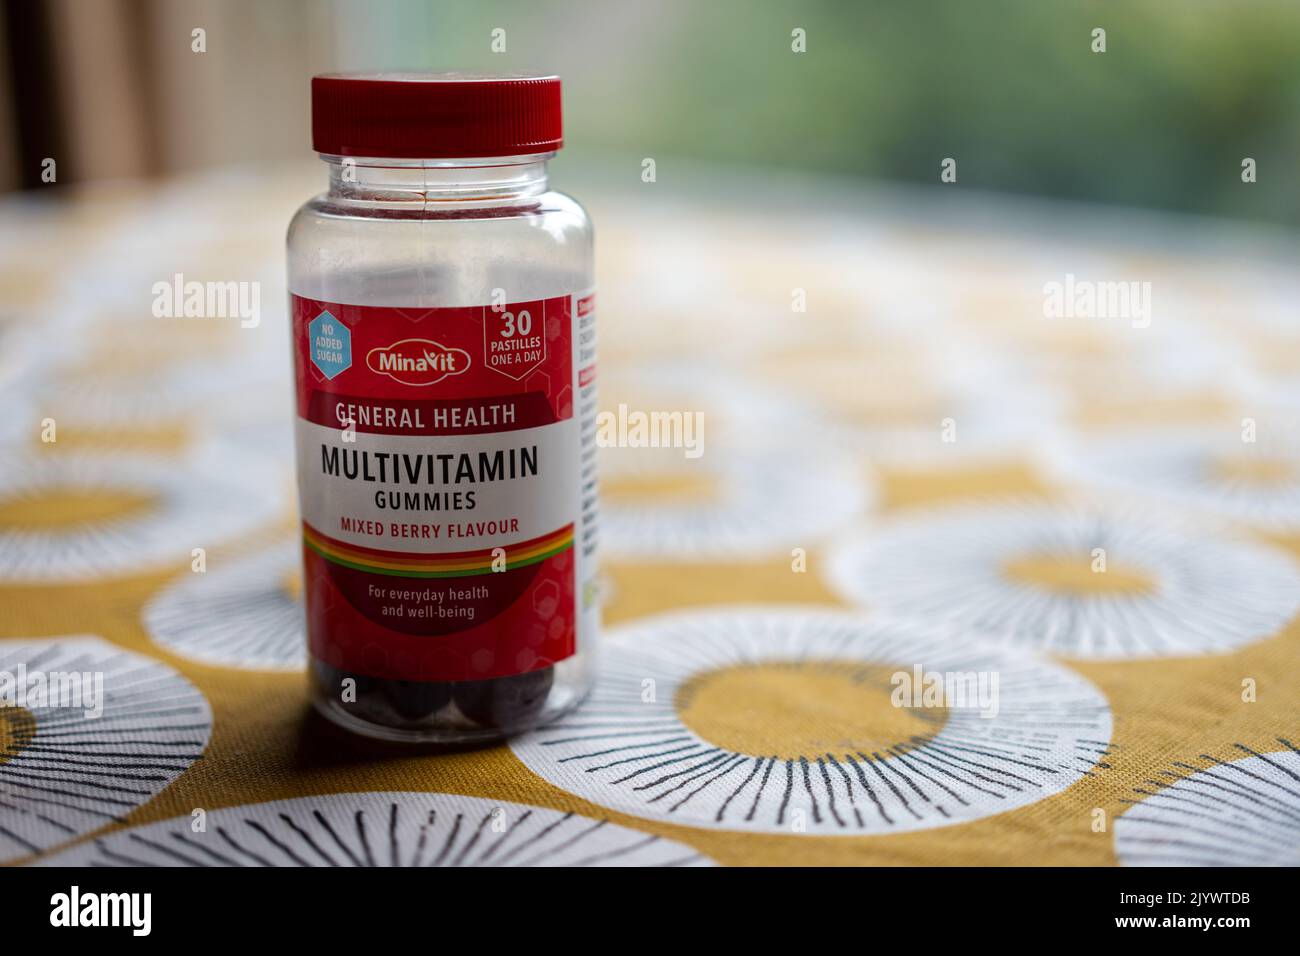 A bottle of mixed berry flavor multivitamin gummies on a table. Stock Photo